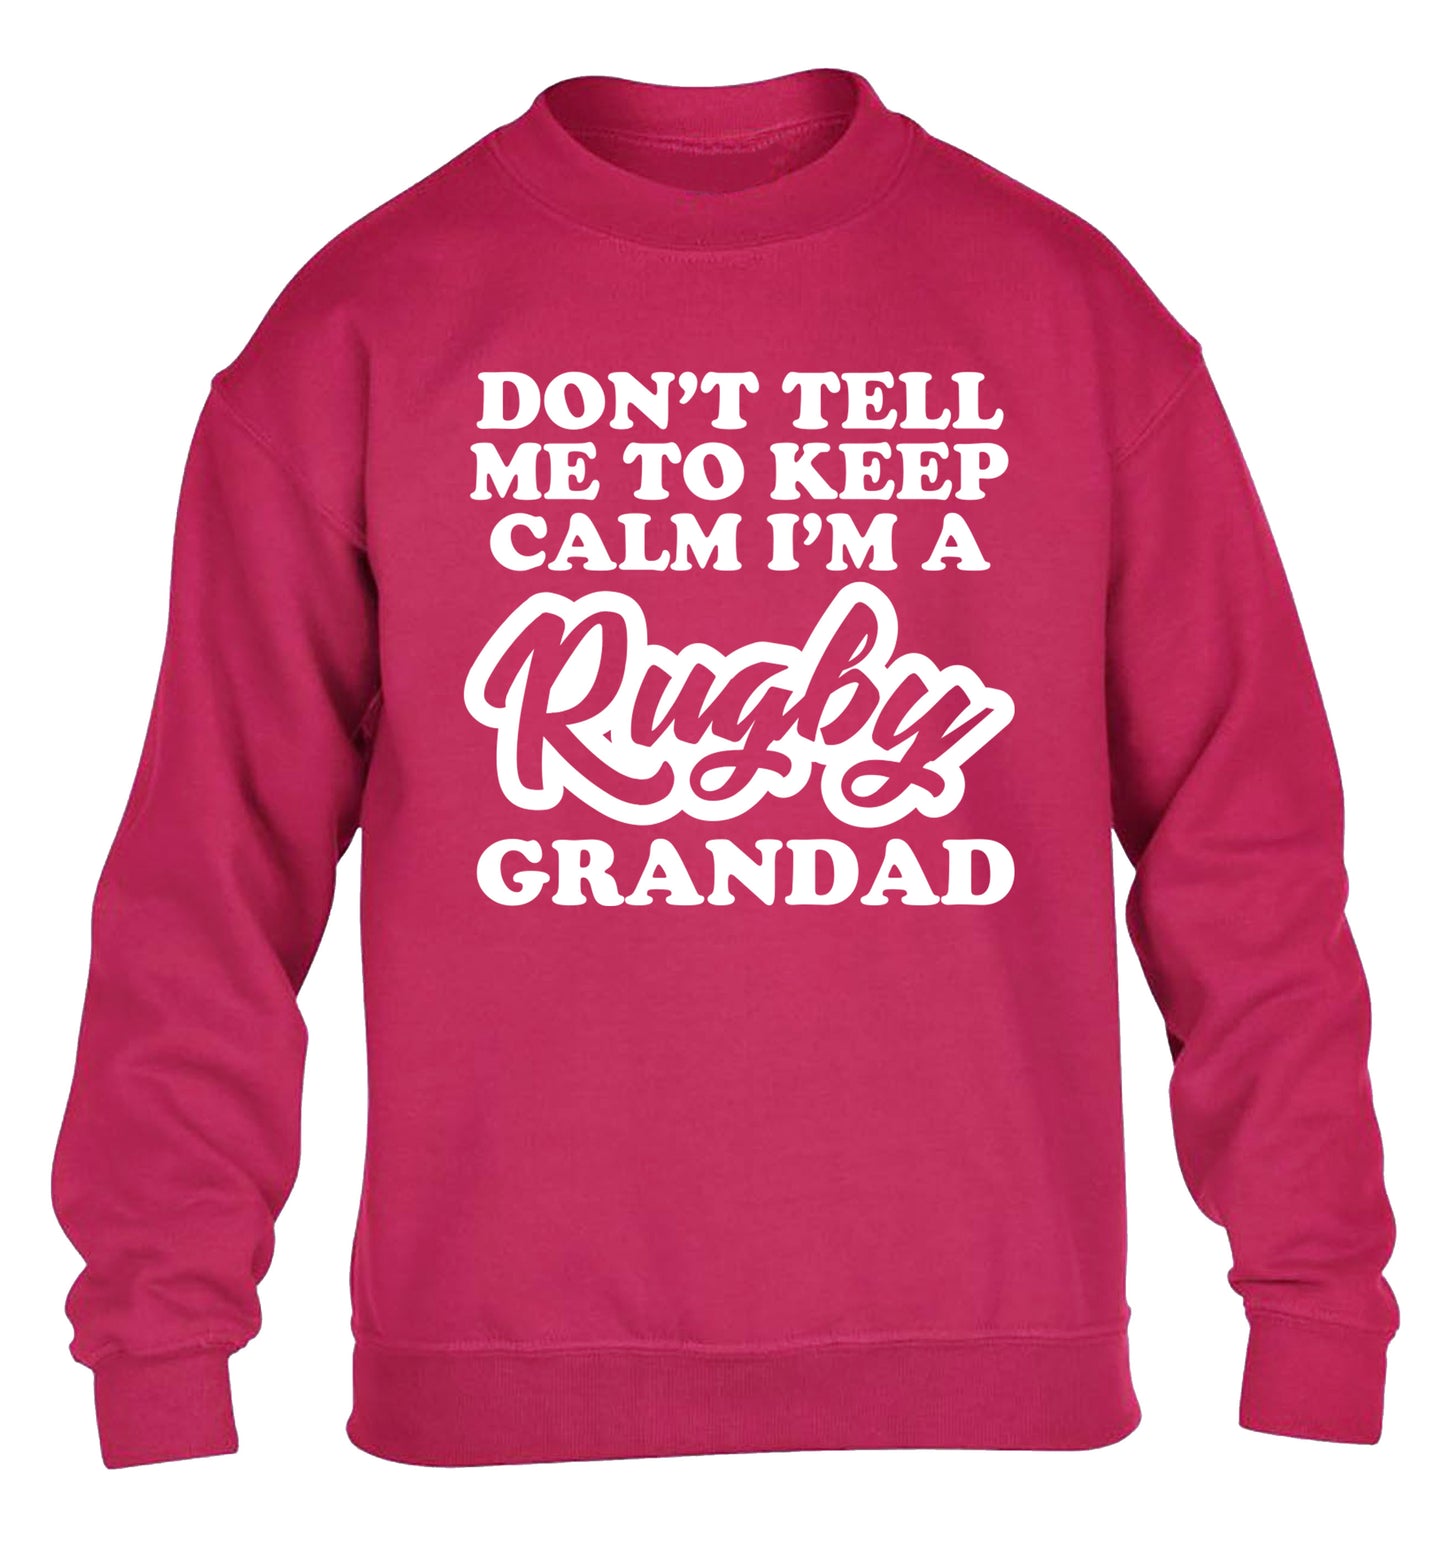 Don't tell me to keep calm I'm a rugby dad children's pink sweater 12-13 Years